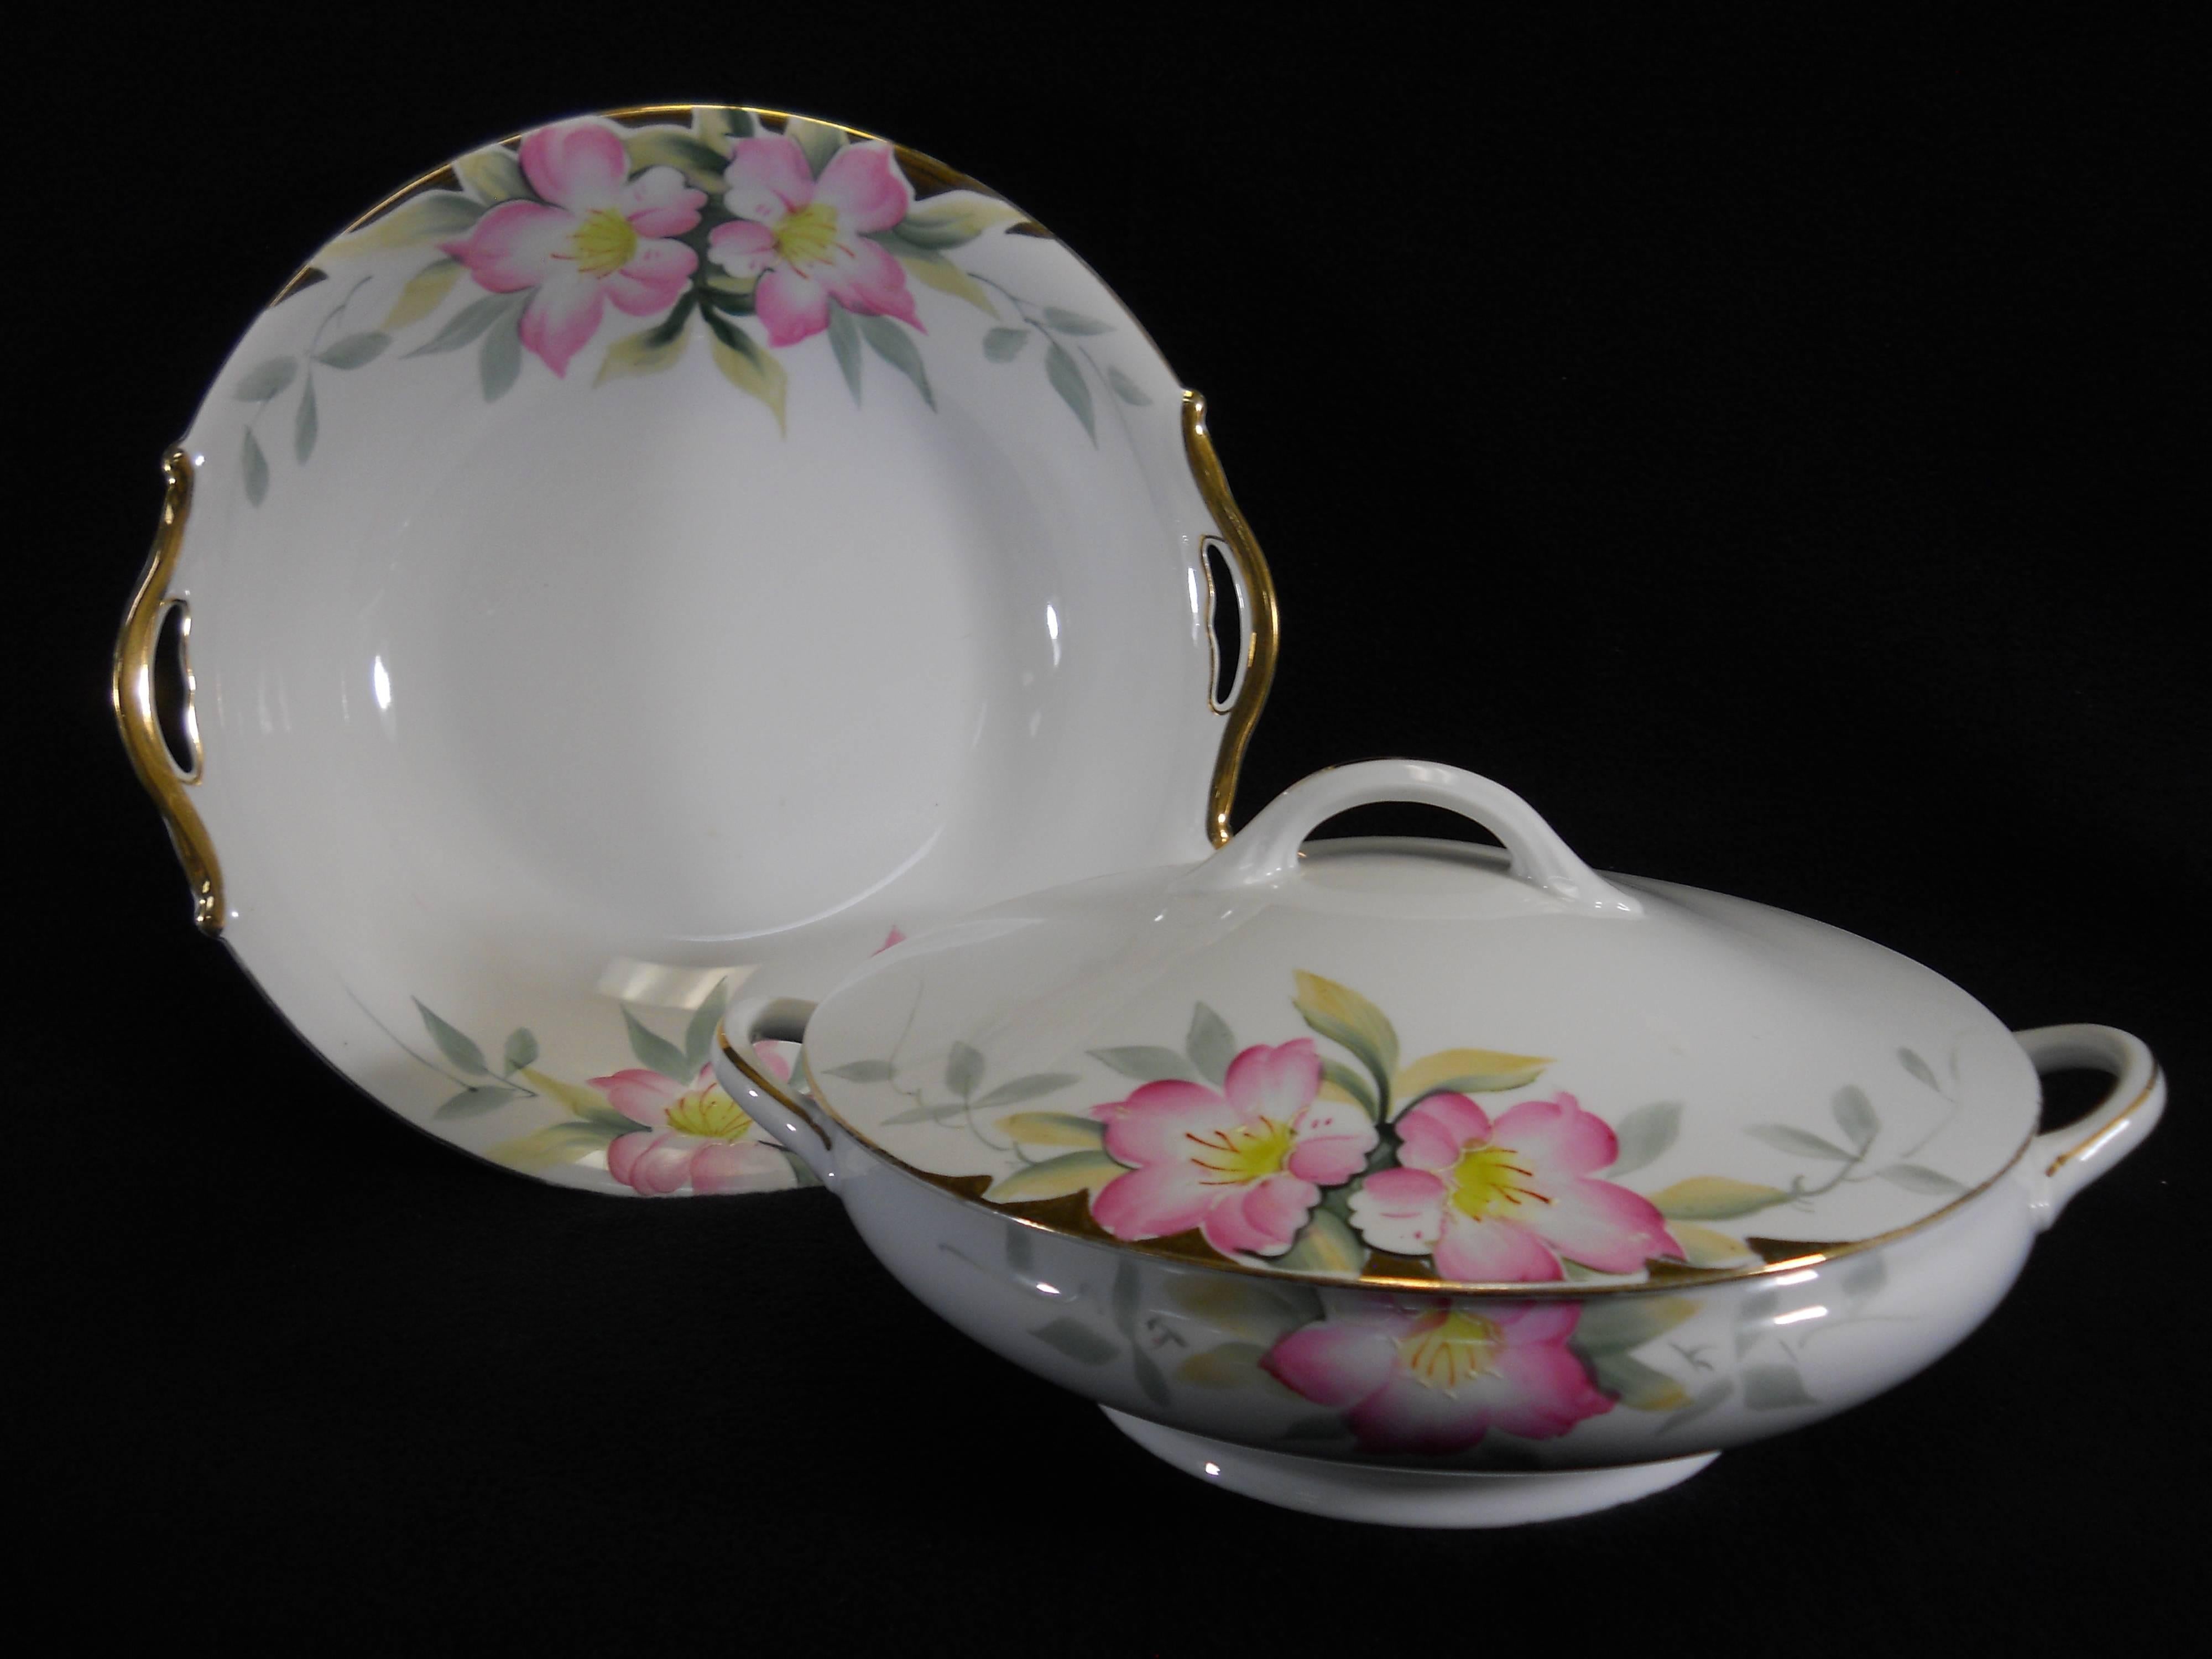 20th Century Noritake China Azalea Pattern Hand-Painted Service for 12 Plue Serving